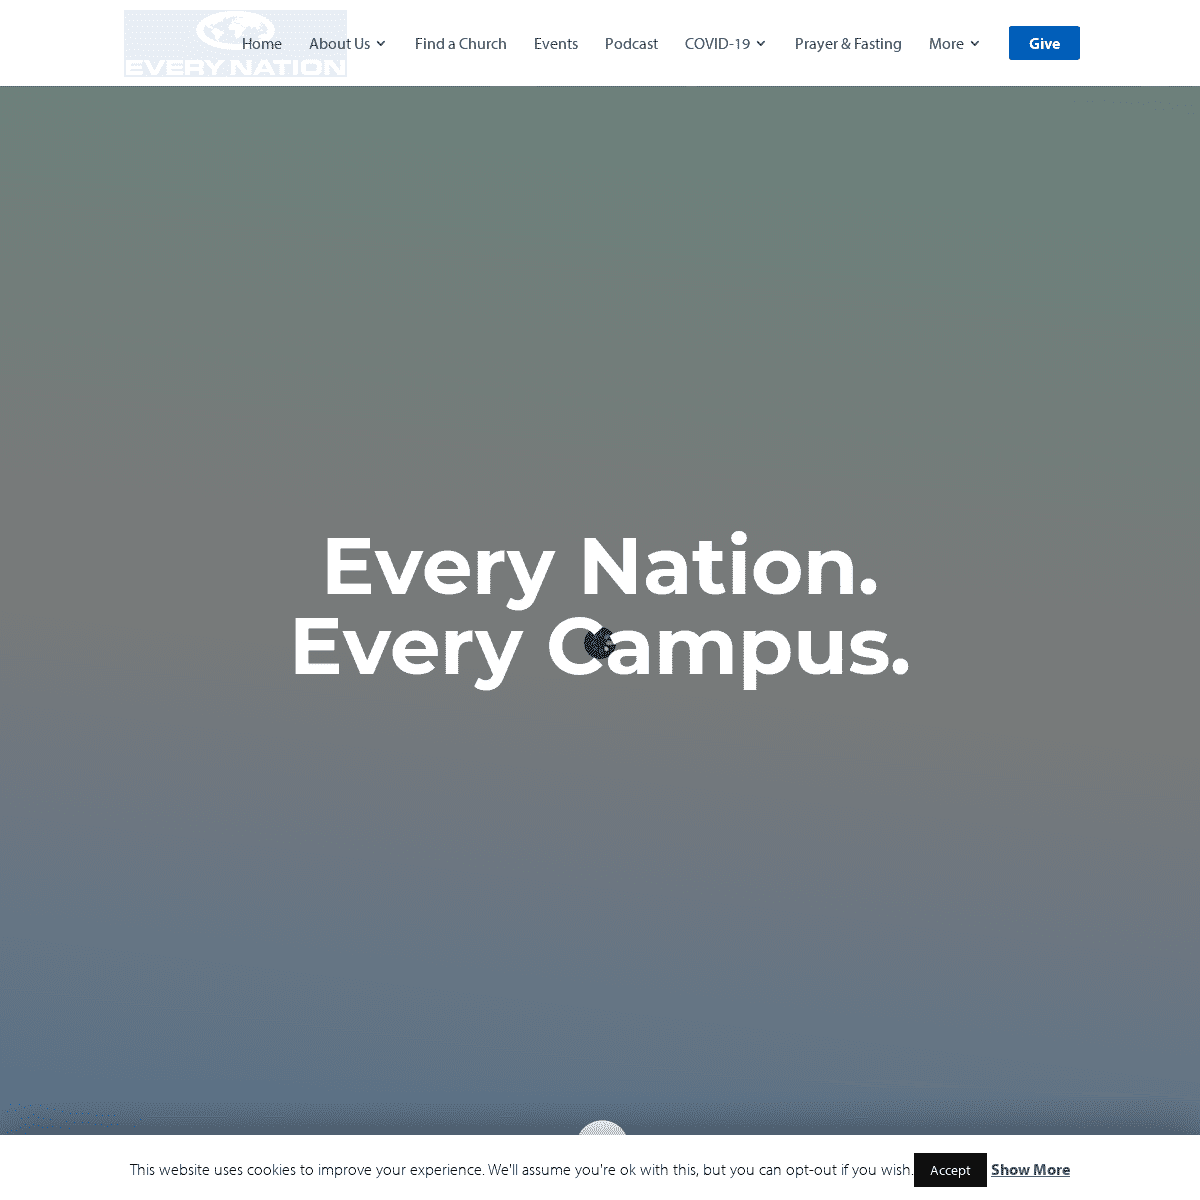 A complete backup of https://everynation.org